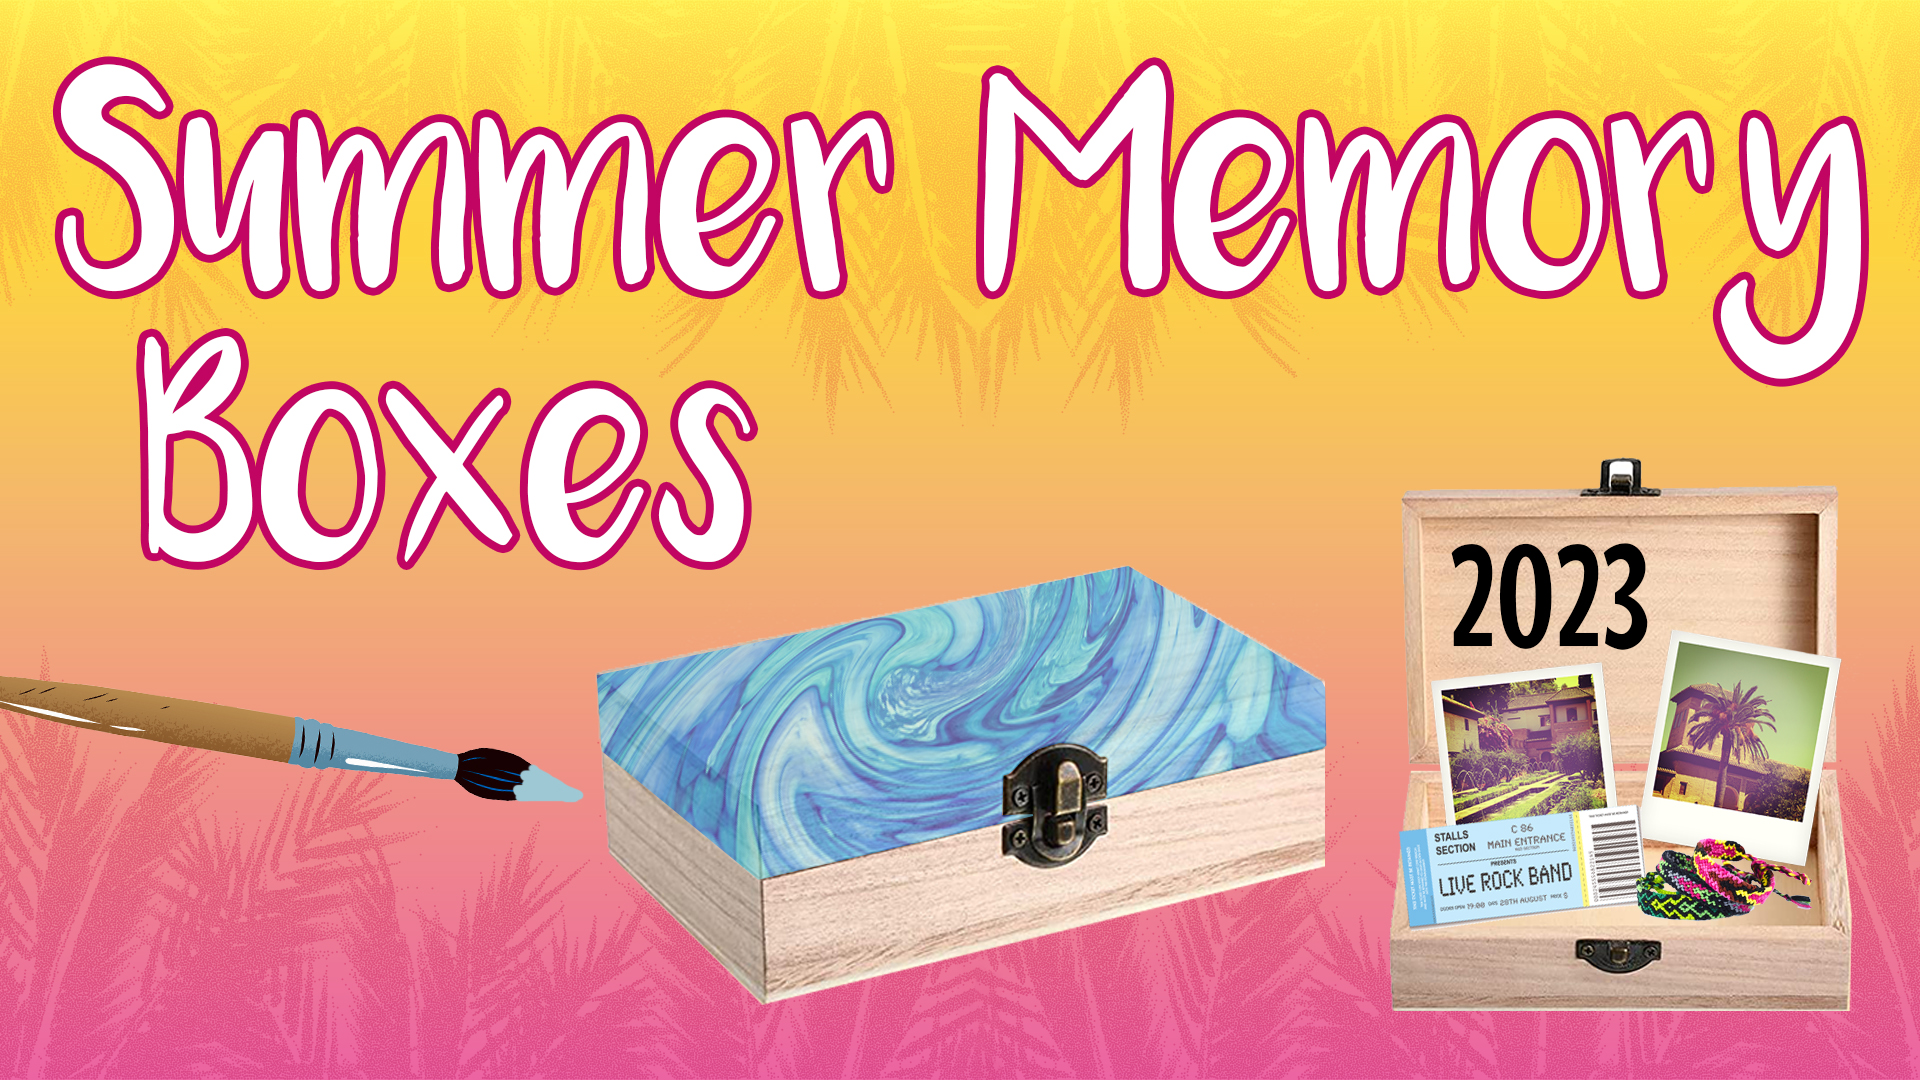 Image reads "Summer Memory Boxes" against a gradient tropical background. A painted blue box is under the title with a paintbrush to the left of the box. An open box is under the title with a concert ticket, friendship bracelets, and two polaroid pictures inside. 